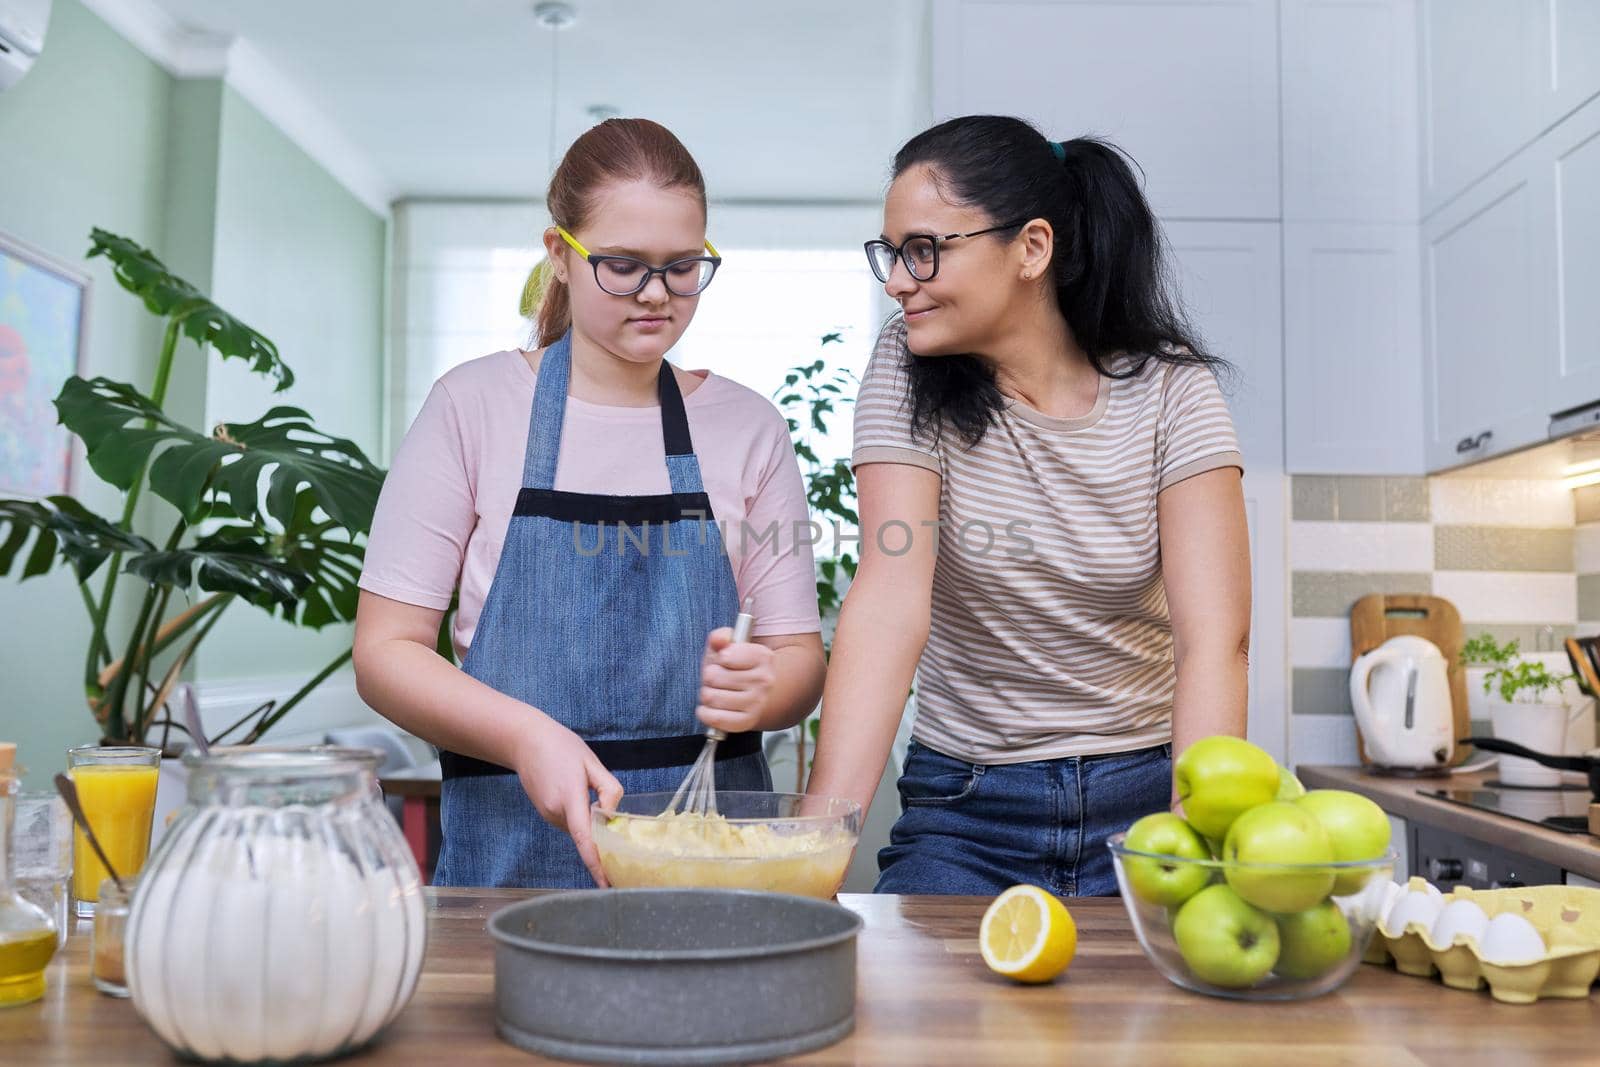 Mom and teenage daughter preparing apple pie together, at home in the kitchen. Family, parent teenager relationship, lifestyle, eating at home concept